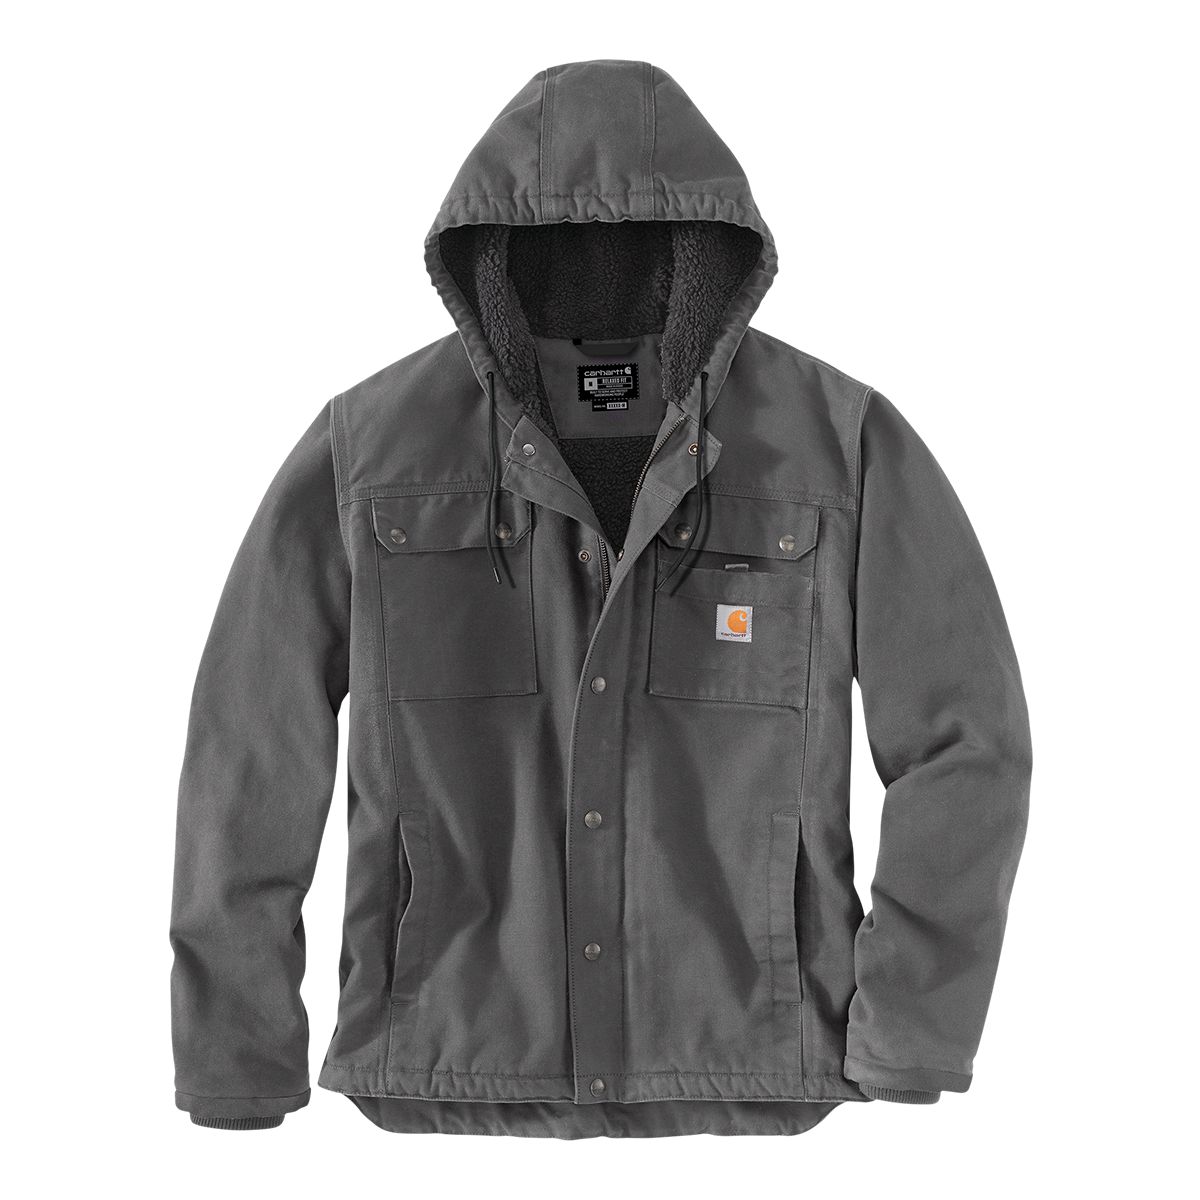 Carhartt Men's Washed Duck Sherpa Lined Utility Jacket